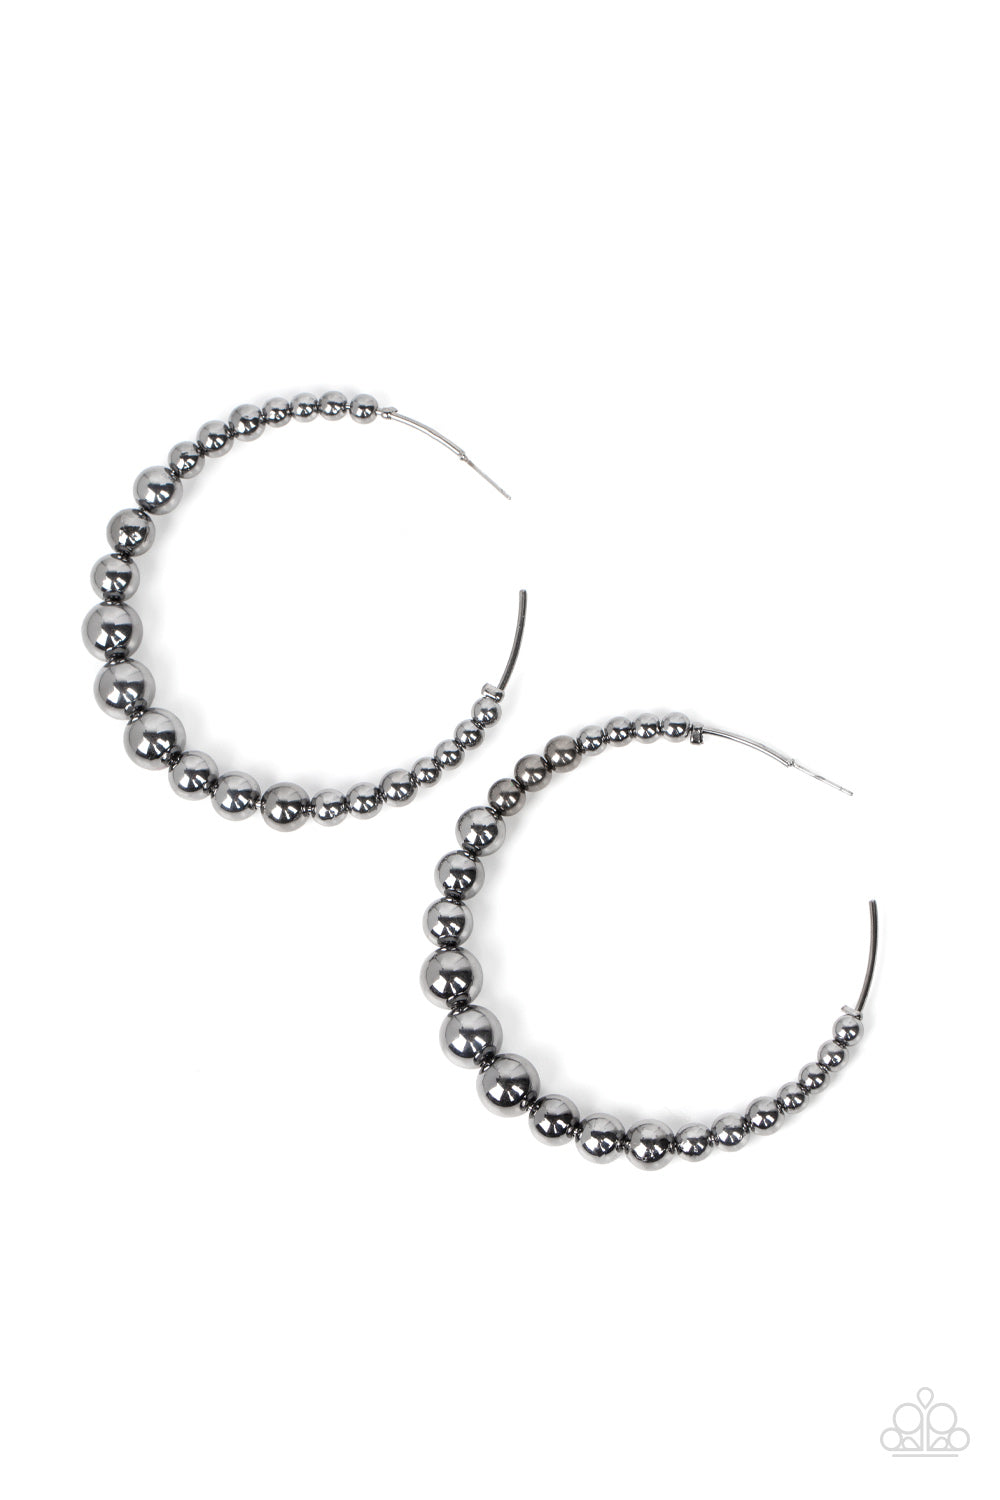 Paparazzi Accessories Show Off Your Curves - Black Gradually increasing in size, glistening gunmetal beads are threaded along an oversized gunmetal hoop for a gritty and glamorous effect. Earring attaches to a standard post fitting. Hoop measures approxim